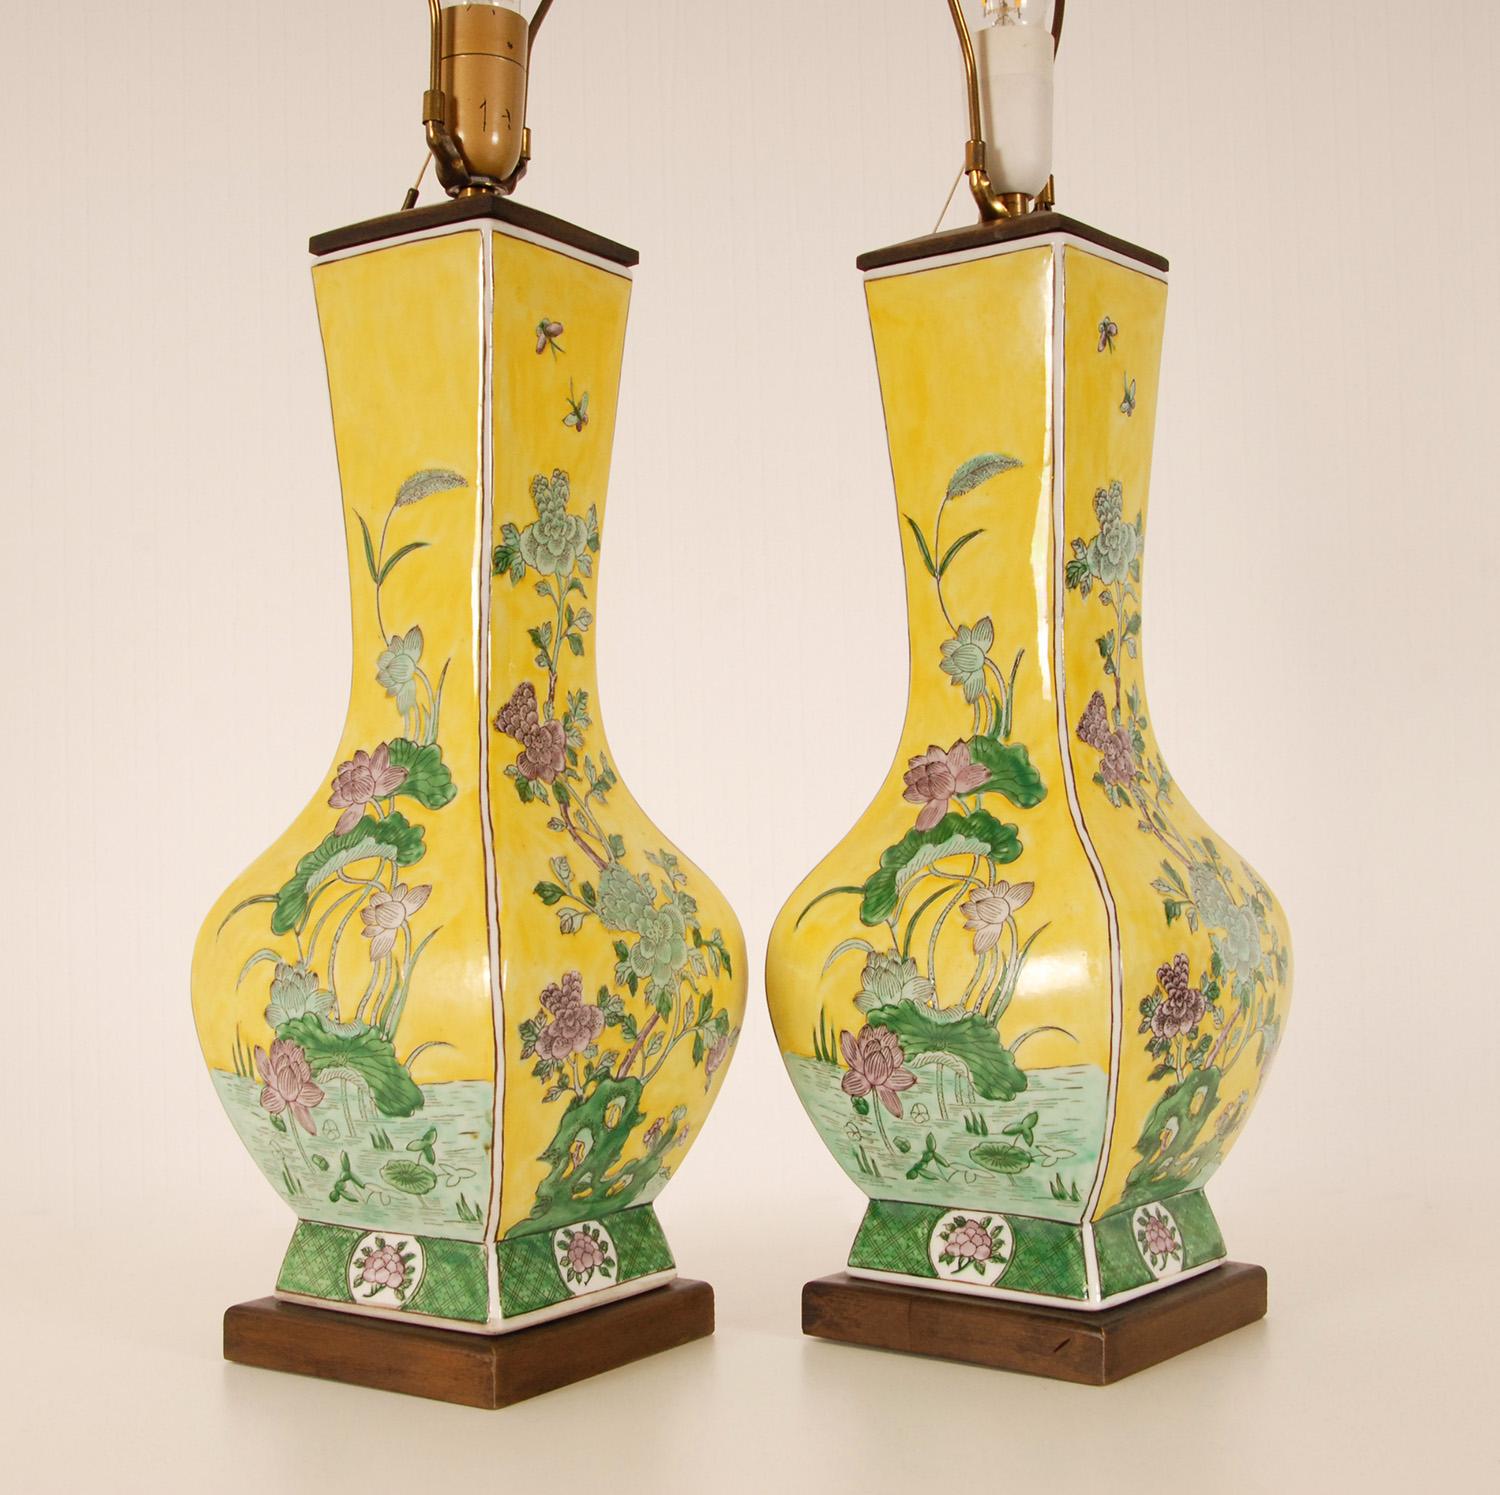 20th Century Vintage Ceramic Chinoiserie Lamps Famille Jaune and Famille Verte Table Lamps